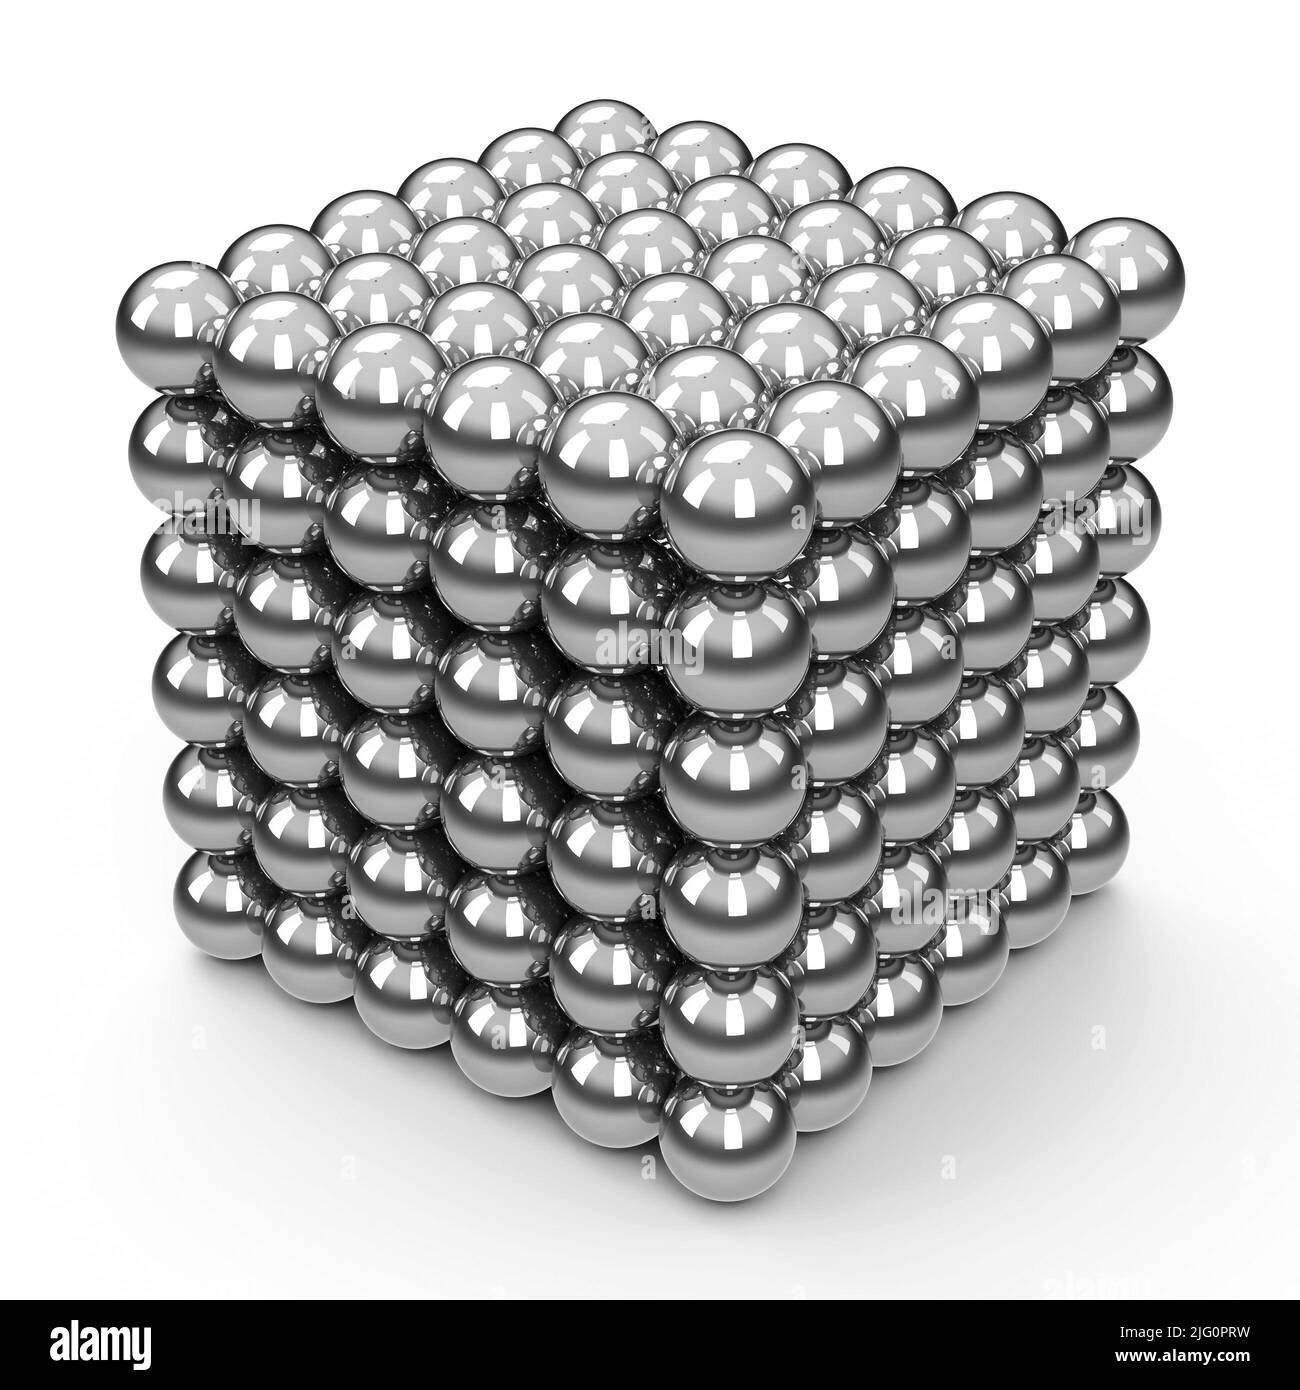 The Neocube - neodymium magnet toy - isolated on a white, three-dimensional rendering, 3D illustration Stock Photo